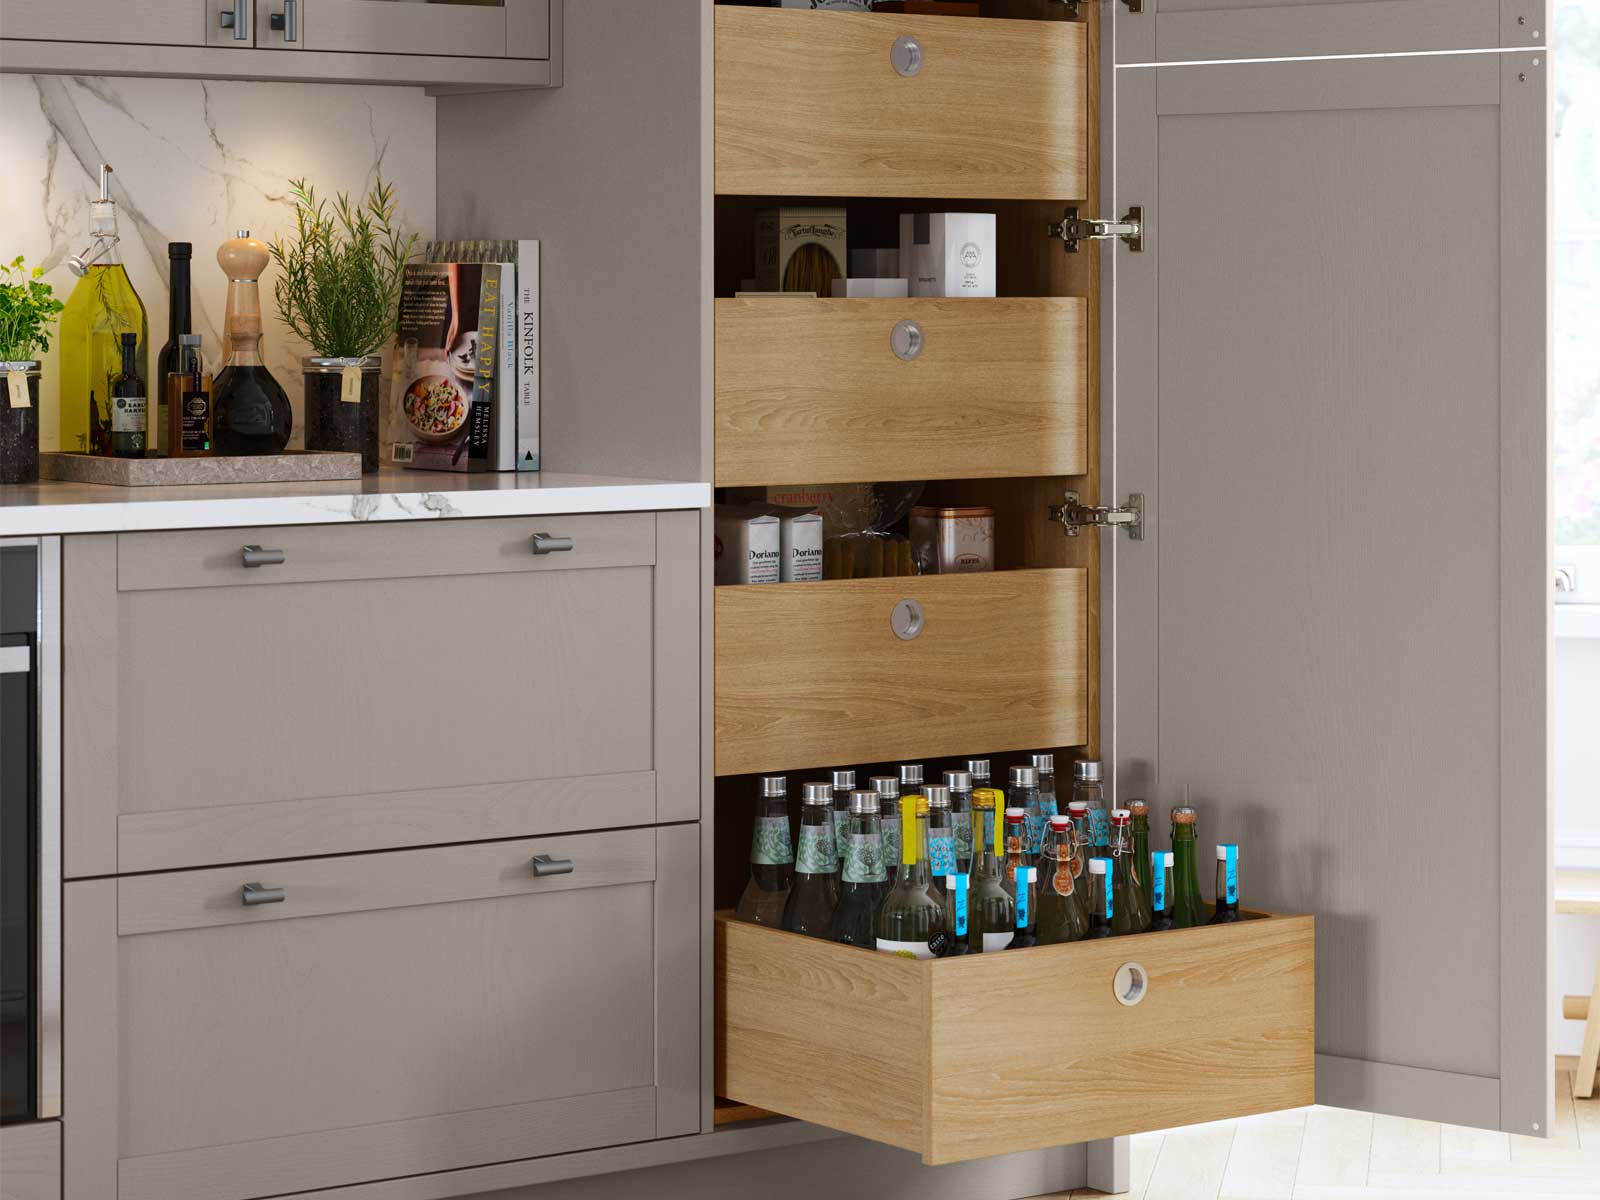 The larder unit with kitchen unit pull-out storage drawers